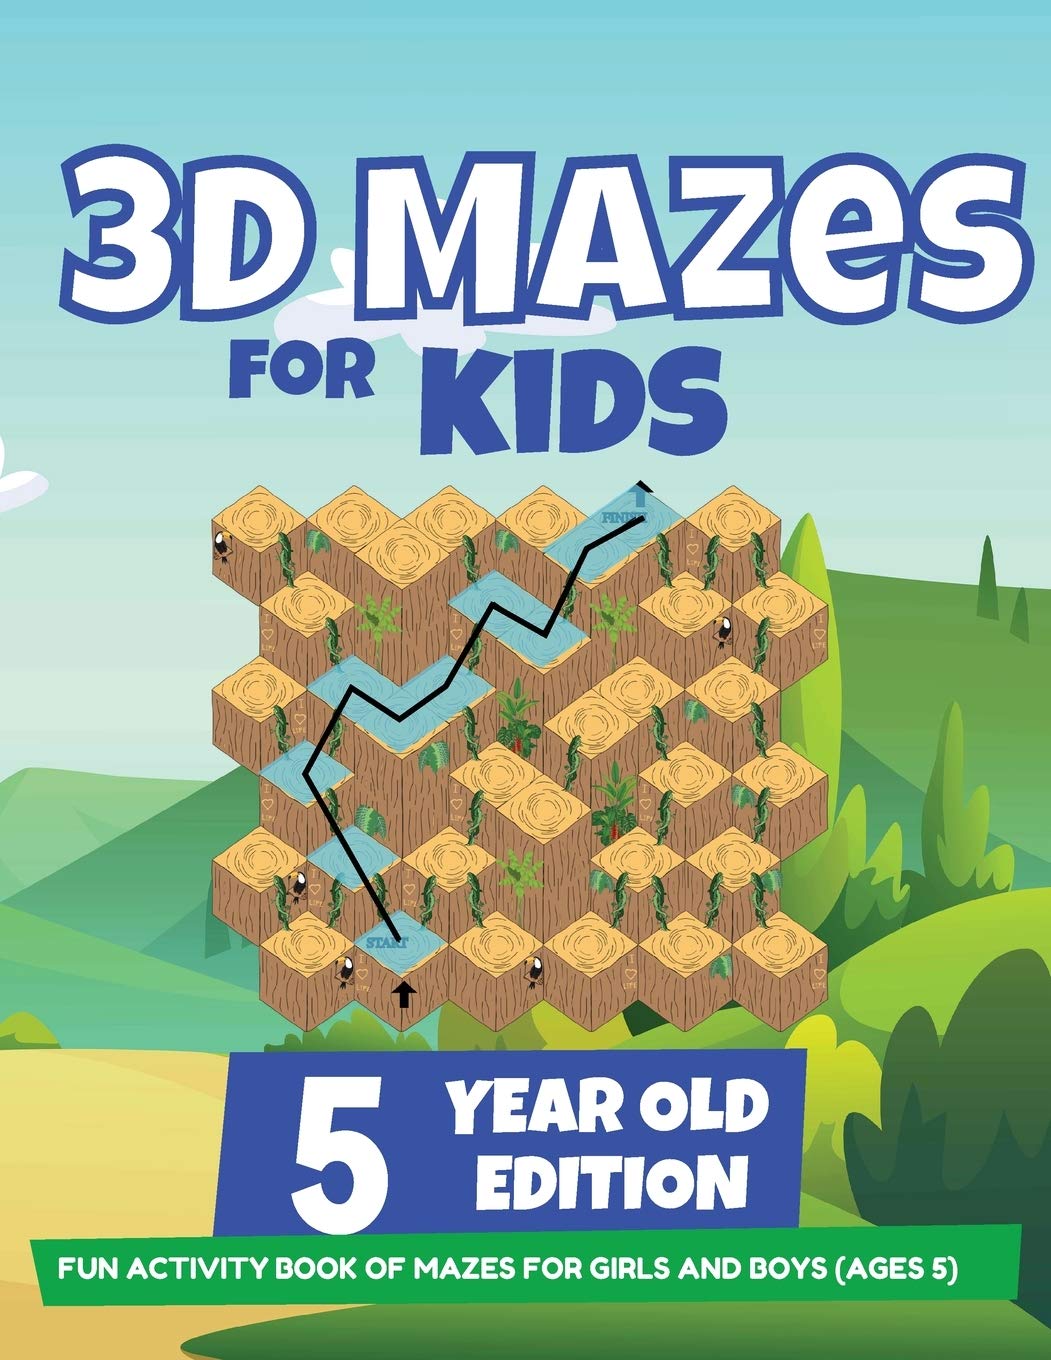 3D Mazes For Kids - 5 Year Old Edition - Fun Activity Book of Mazes For Girls An